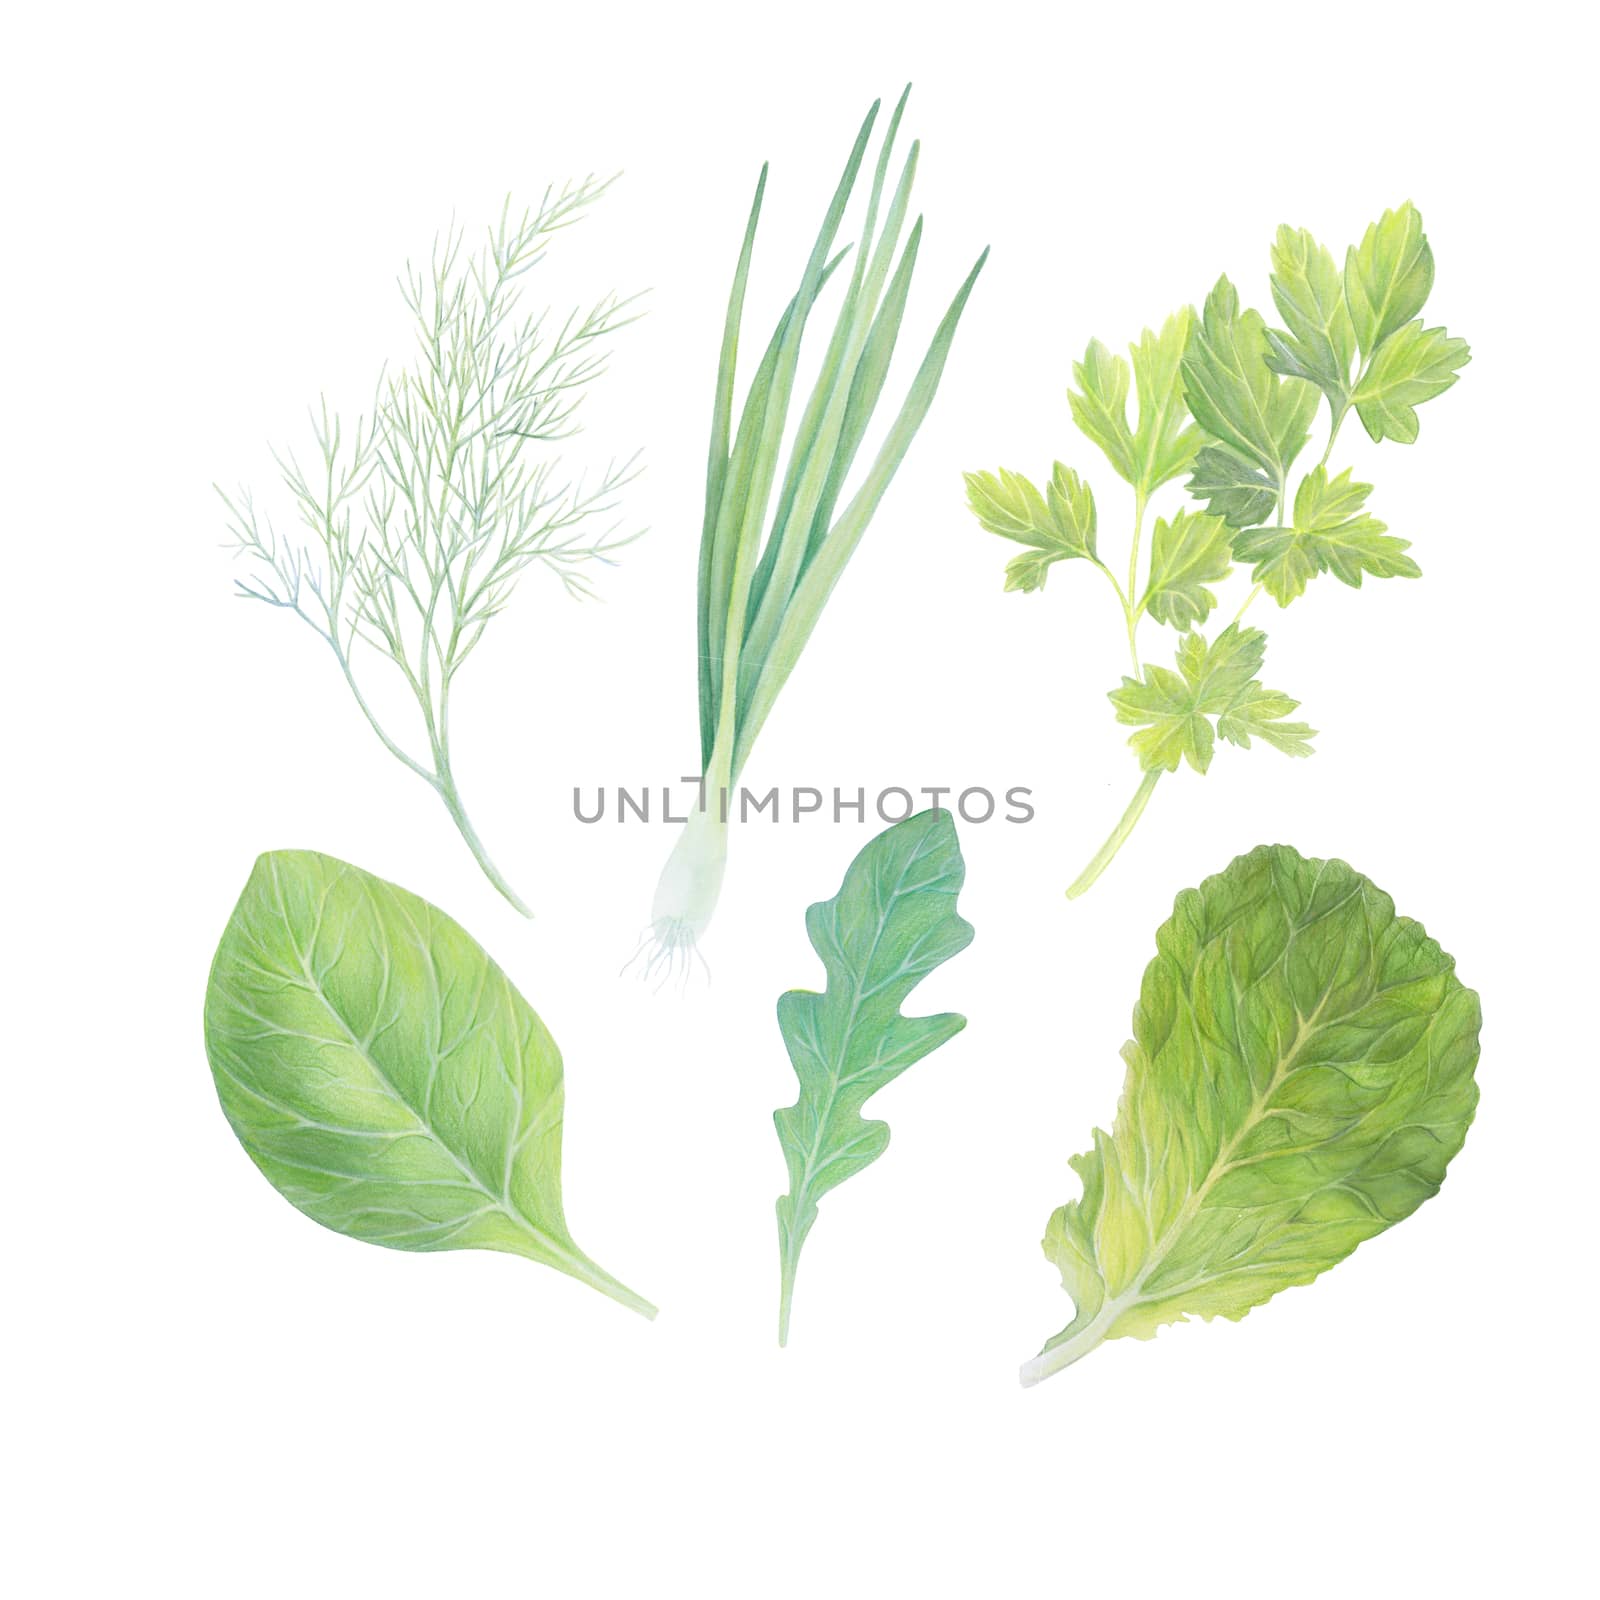 Set of fresh herbs isolated on white background. Spring Green onion, Lettuce, Fennel, Parsley, Arugula rucola (rocket salad) and spinach. Watercolor realistic botanical art. Hand drawn illustration